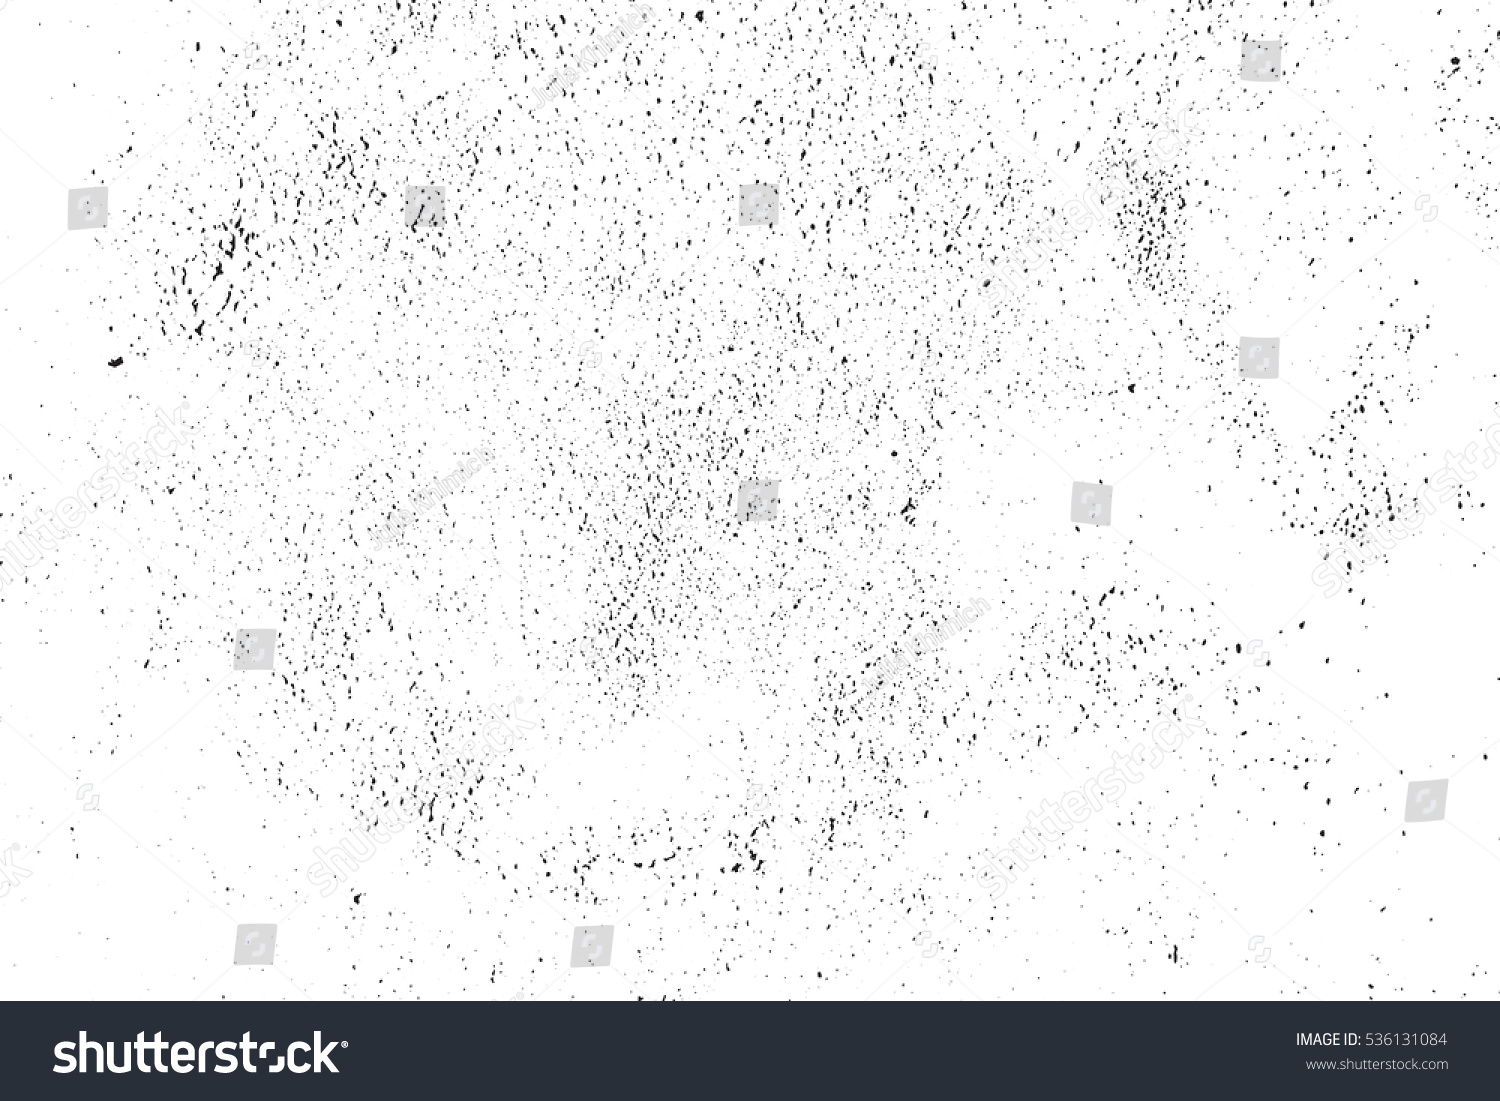 Vector grunge texture. Abstract grainy background, old painted wall. Overlay illustration over any design to create grungy vintage effect and depth. For posters, banners, retro and urban designs. #536131084